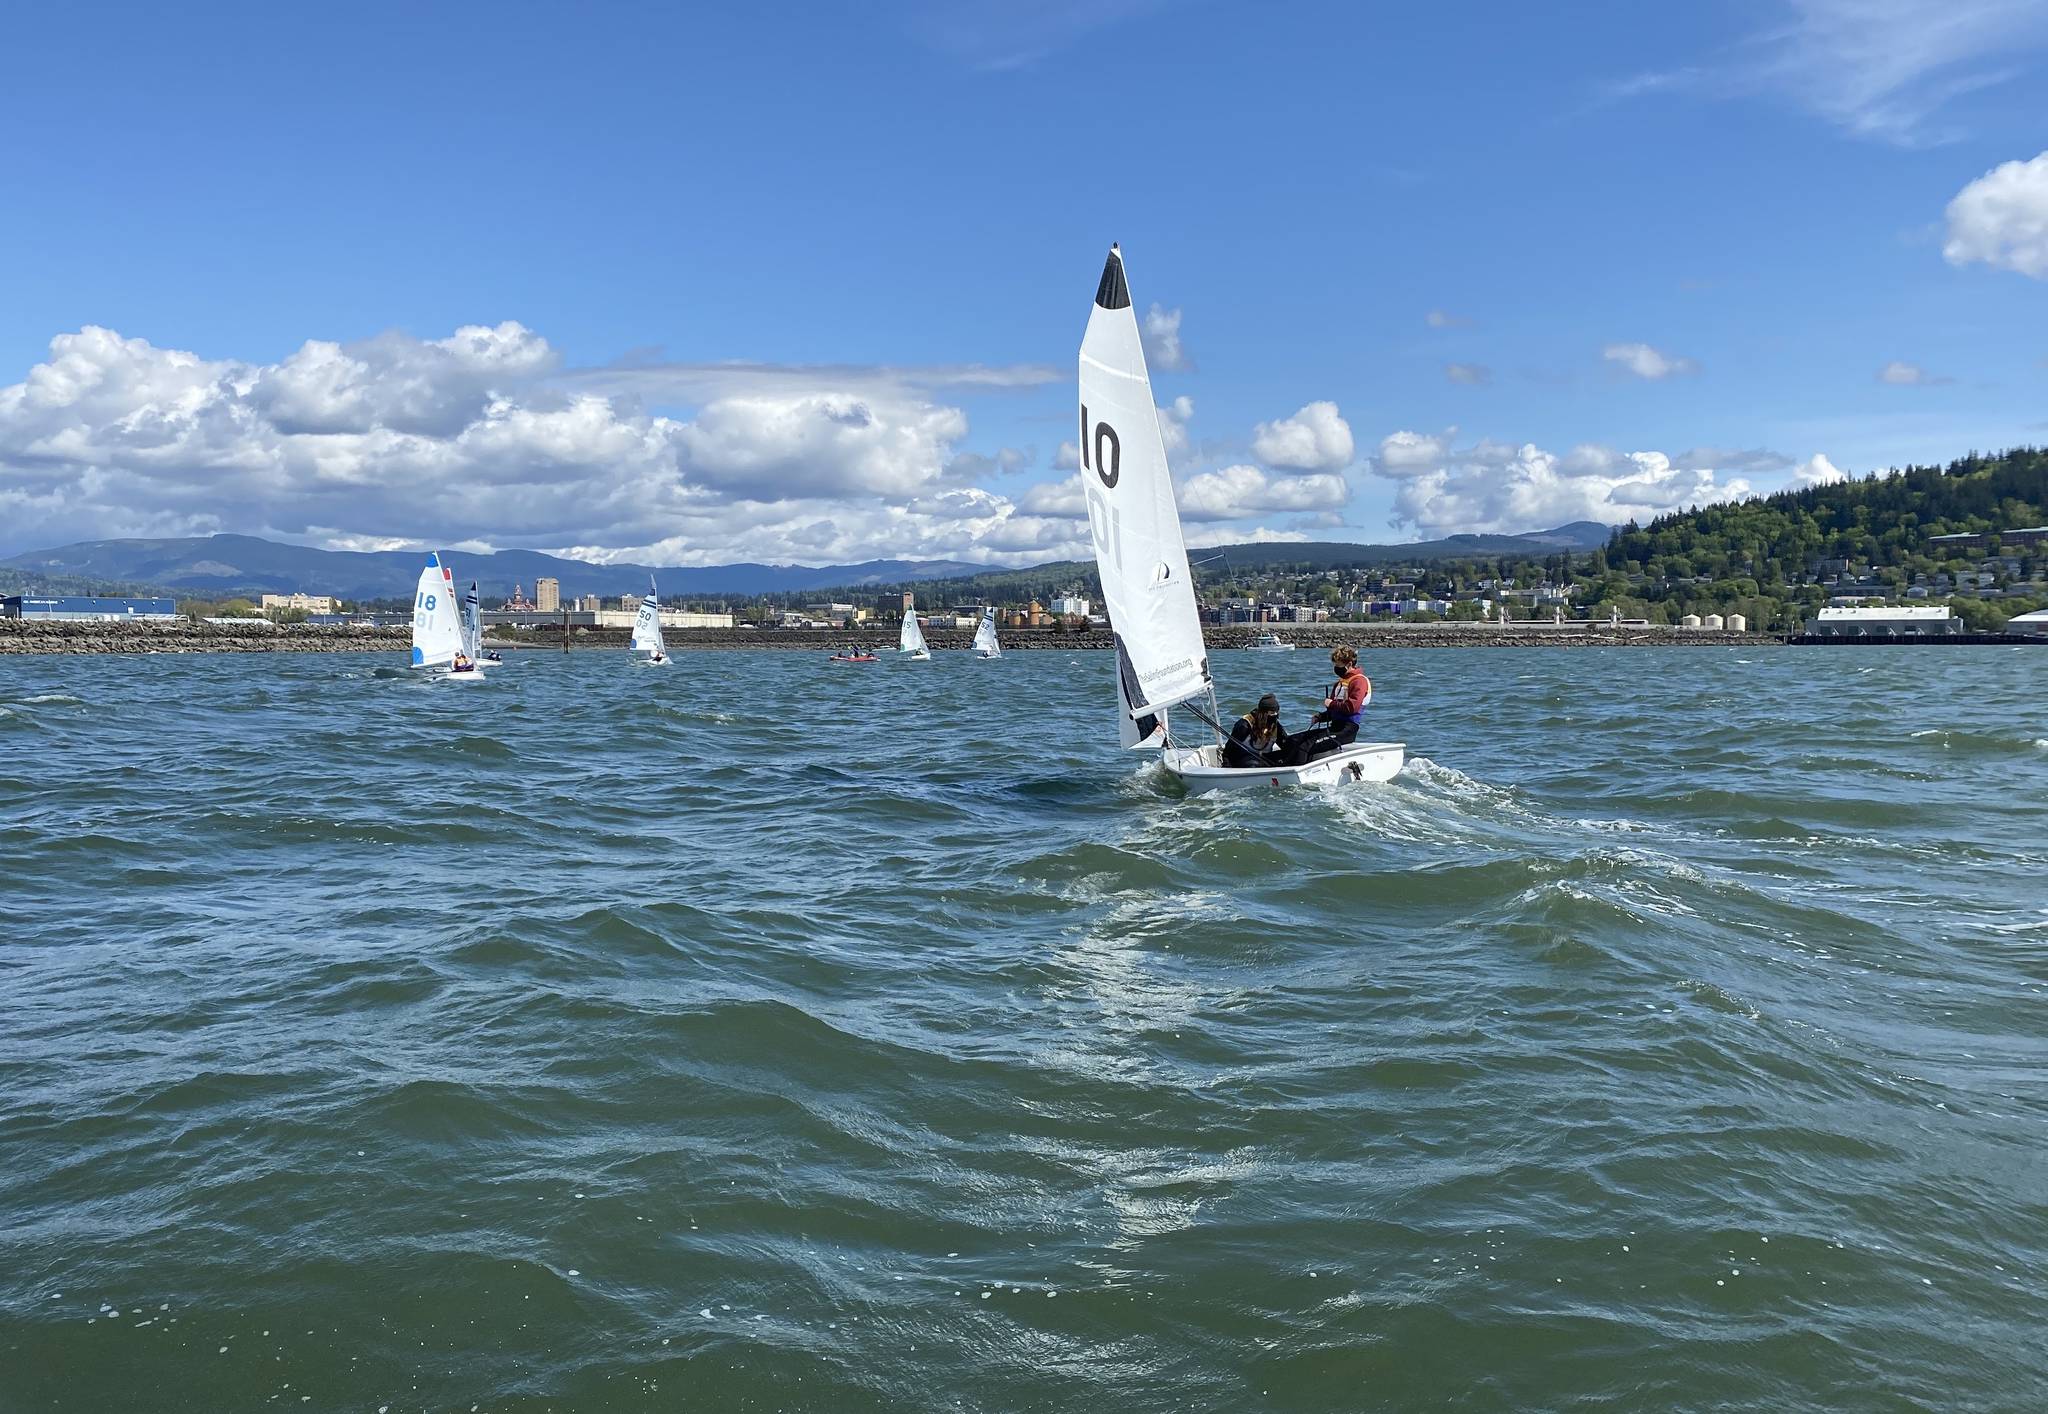 Oak Harbor High School Wildcat sailors compete this weekend in the NWISA Fleet Race Championships. (Photo by Shawn O’Connor Oak Harbor)